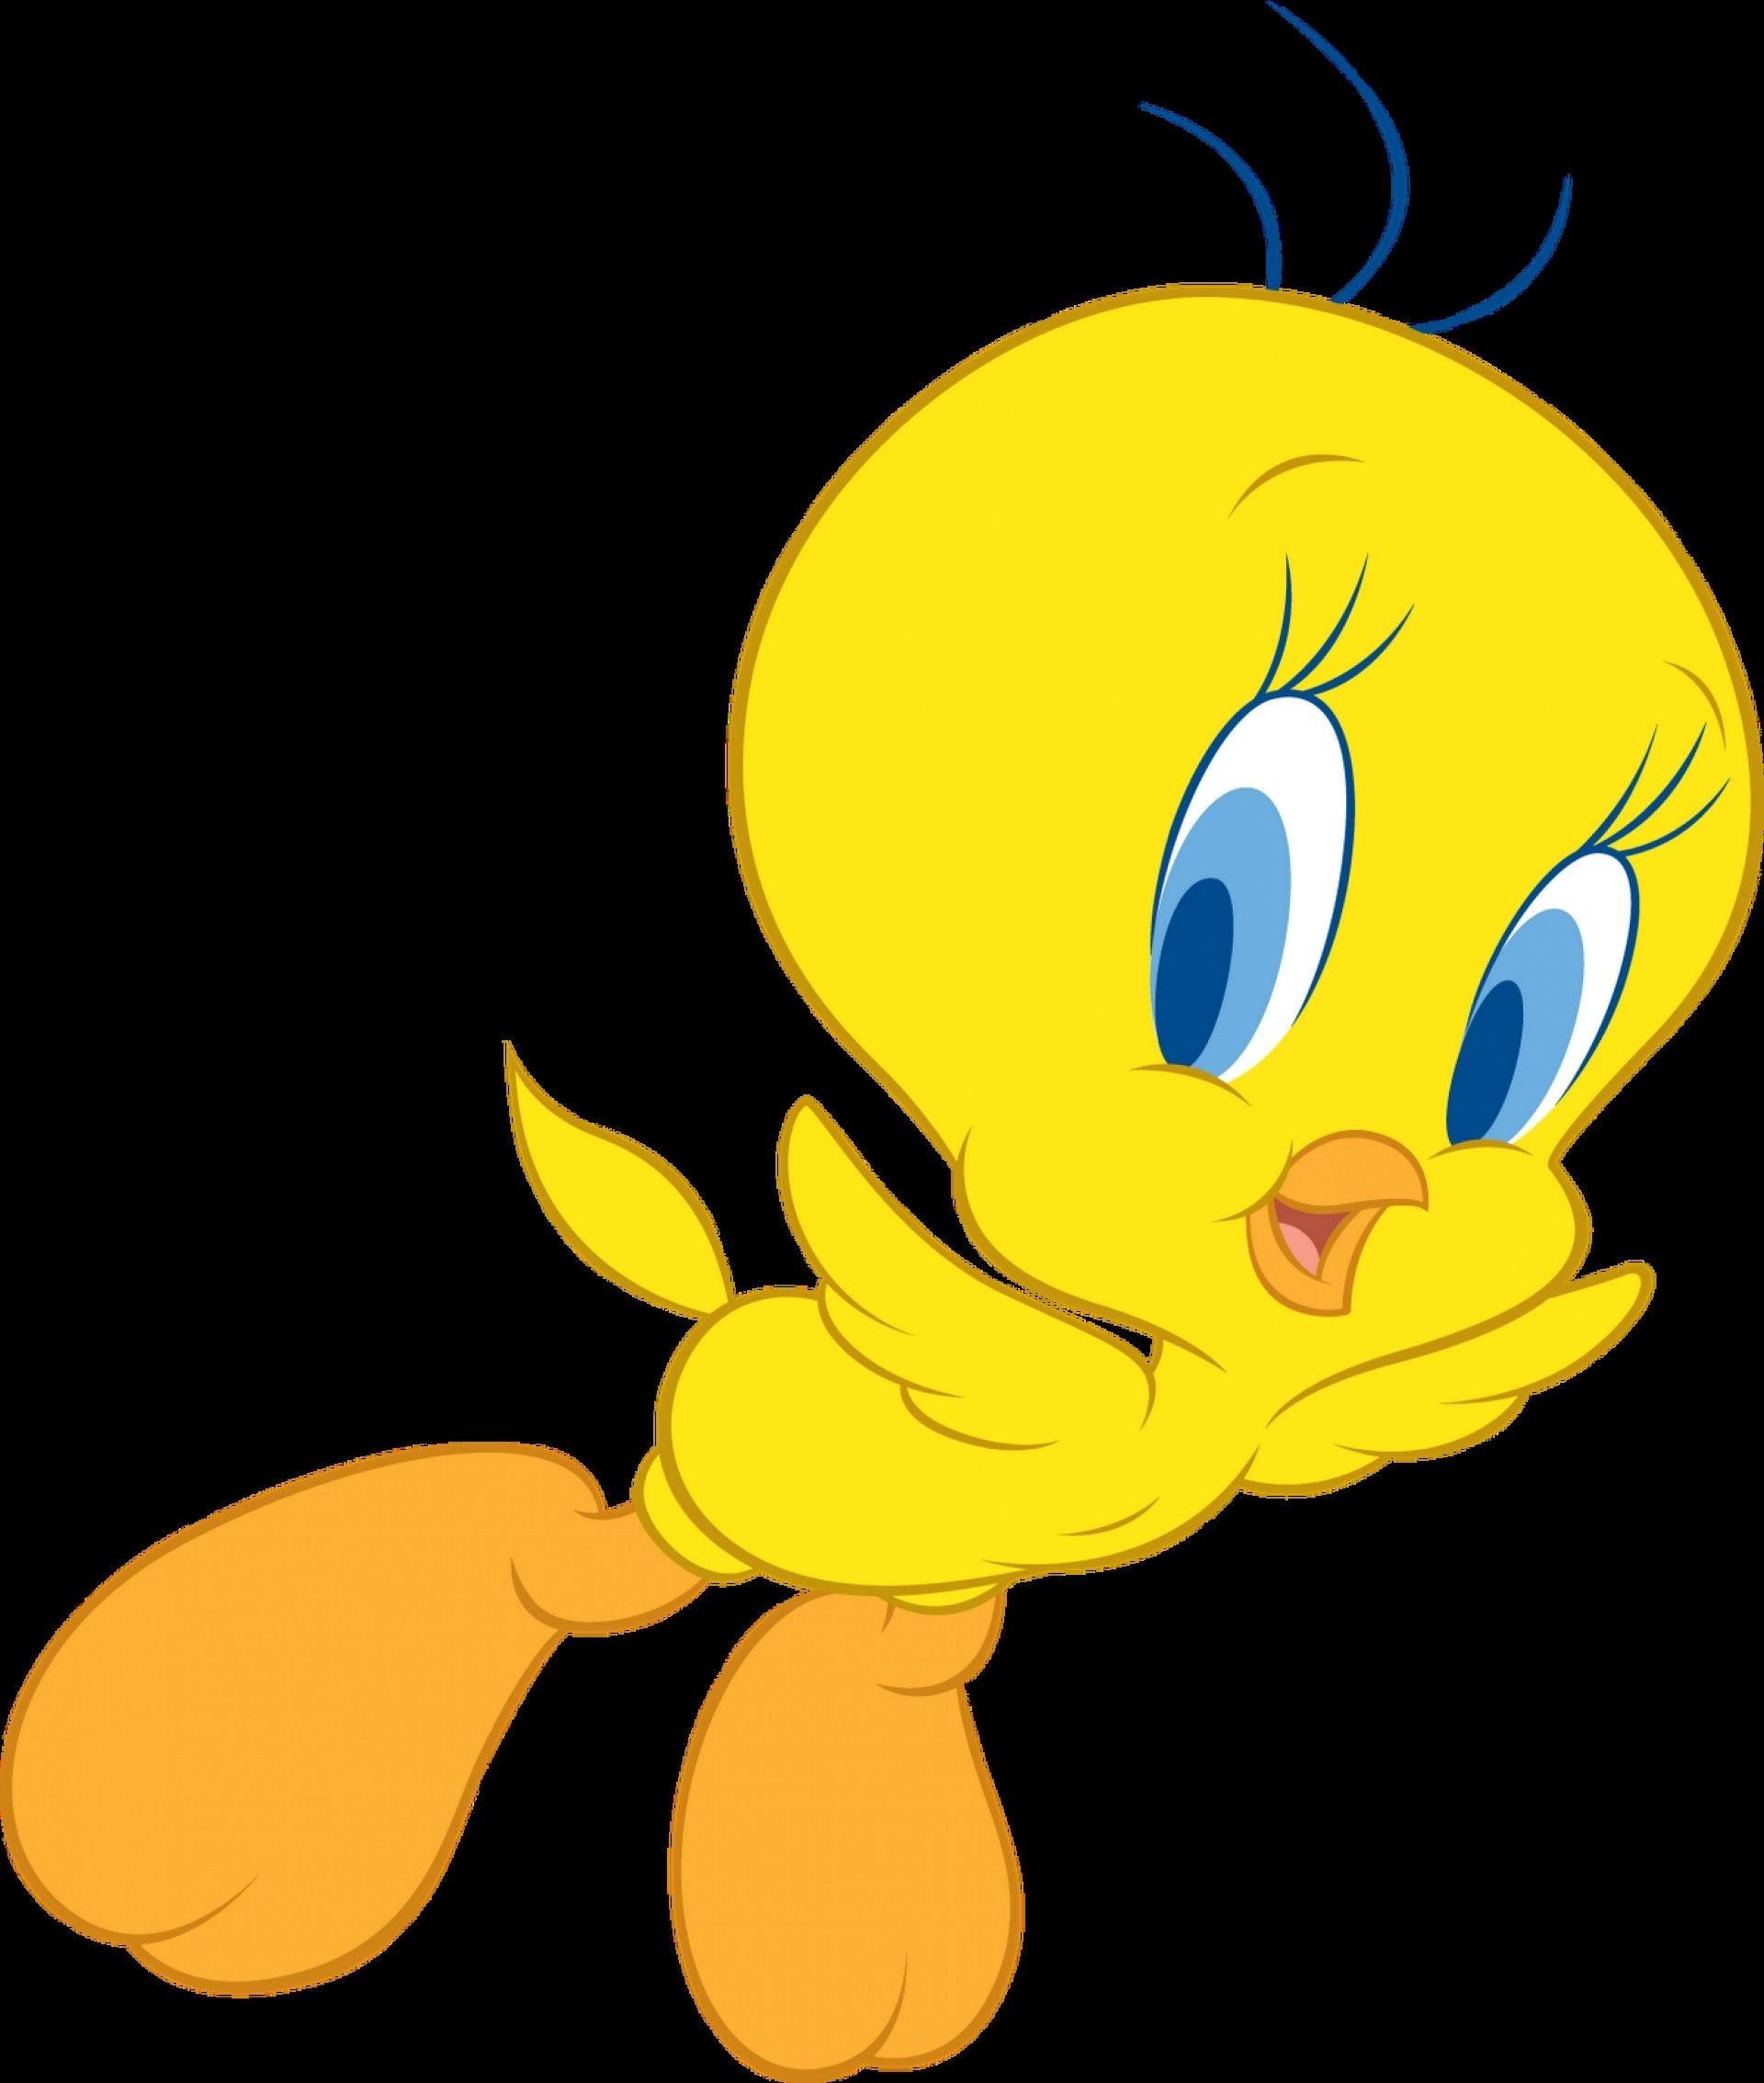 Tweety Wallpapers For Mobile Wallpaper Cave